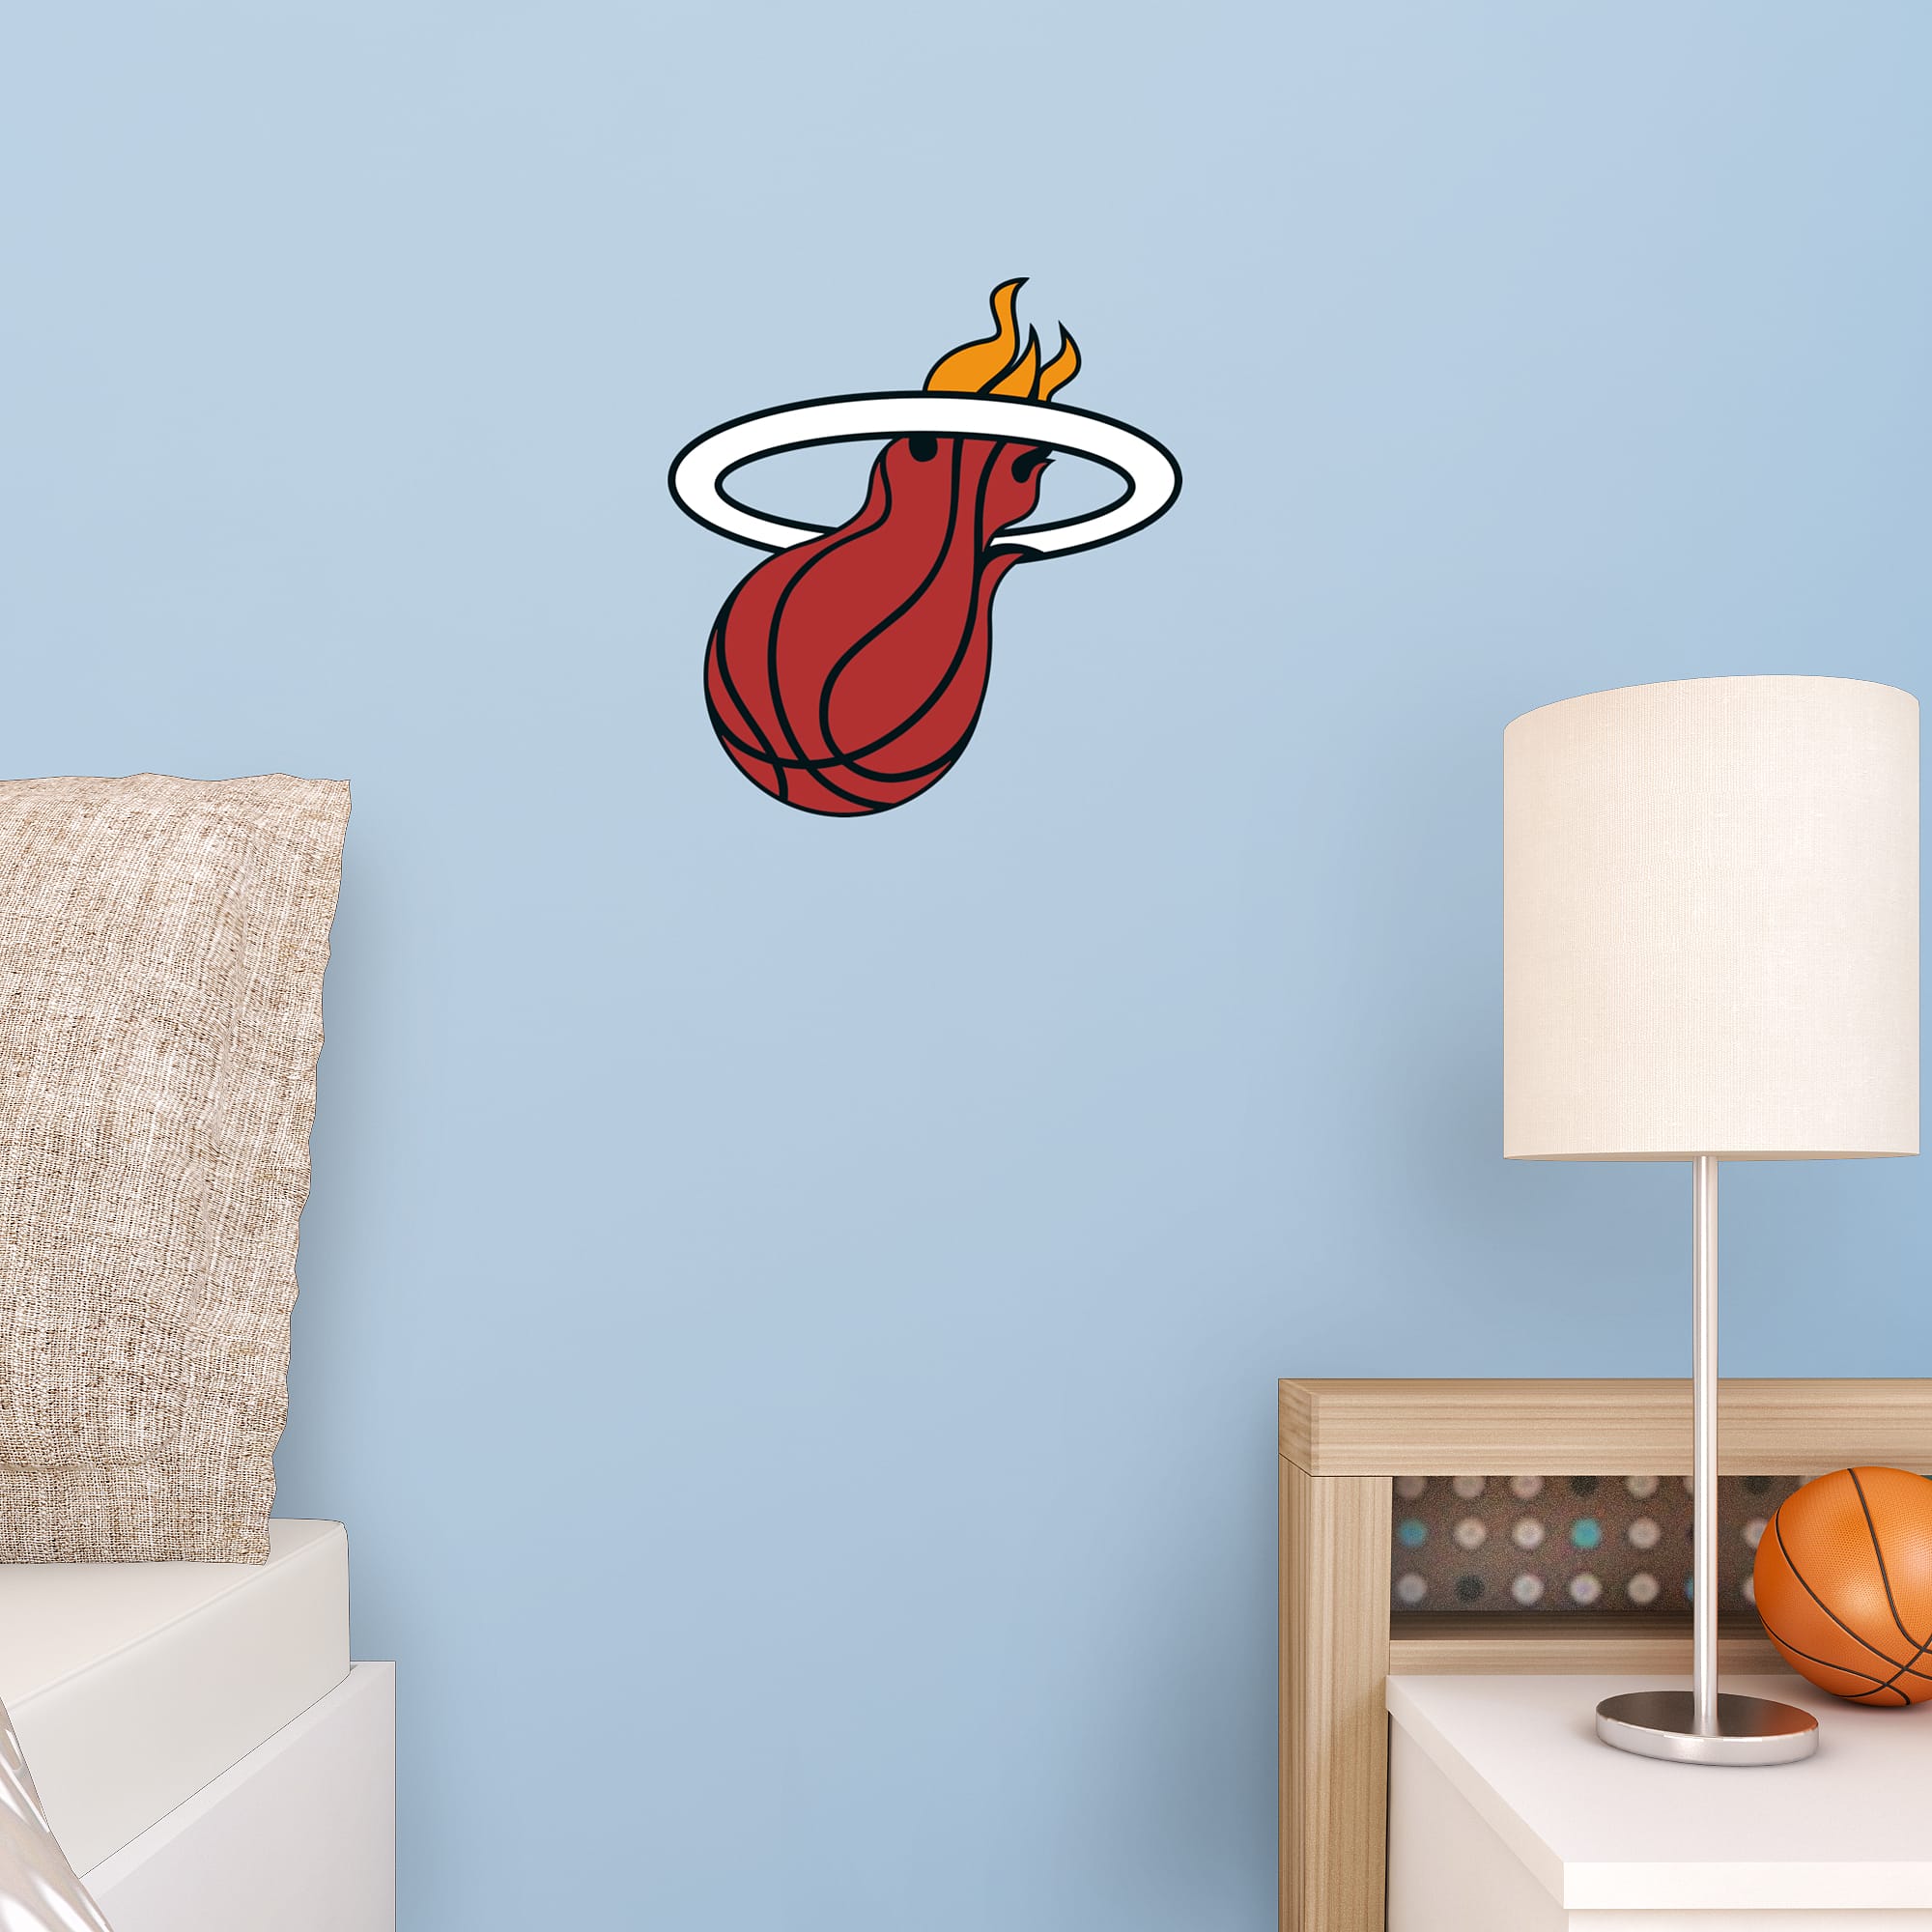 Miami Heat: Logo - Officially Licensed NBA Removable Wall Decal Large by Fathead | Vinyl